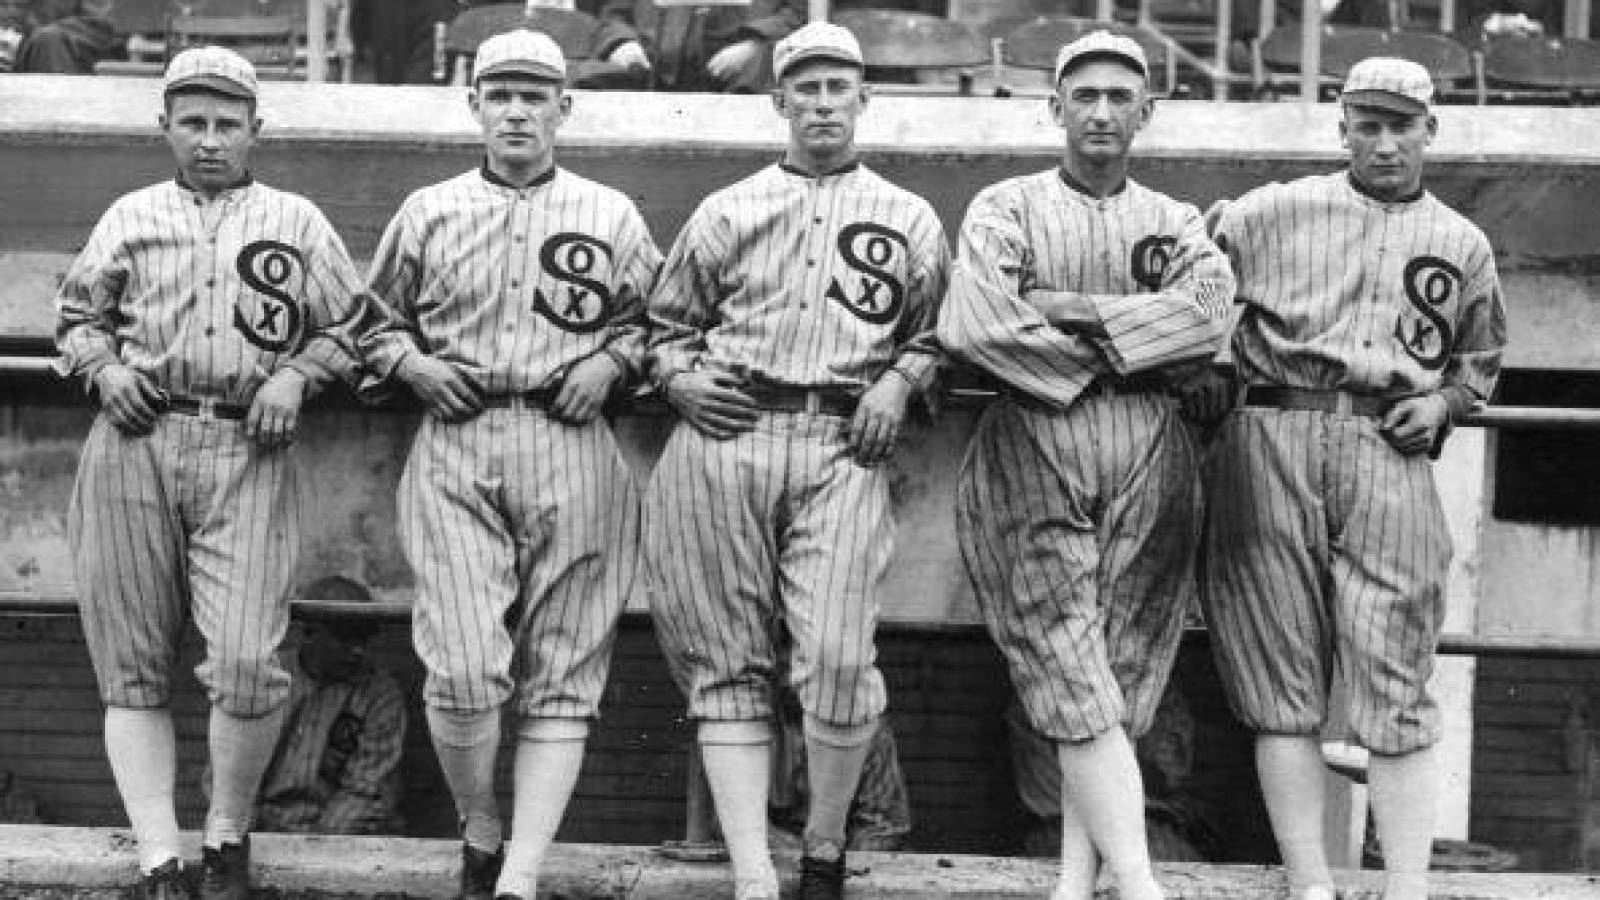 Reds 1919 World Series champions and the Black Sox scandal